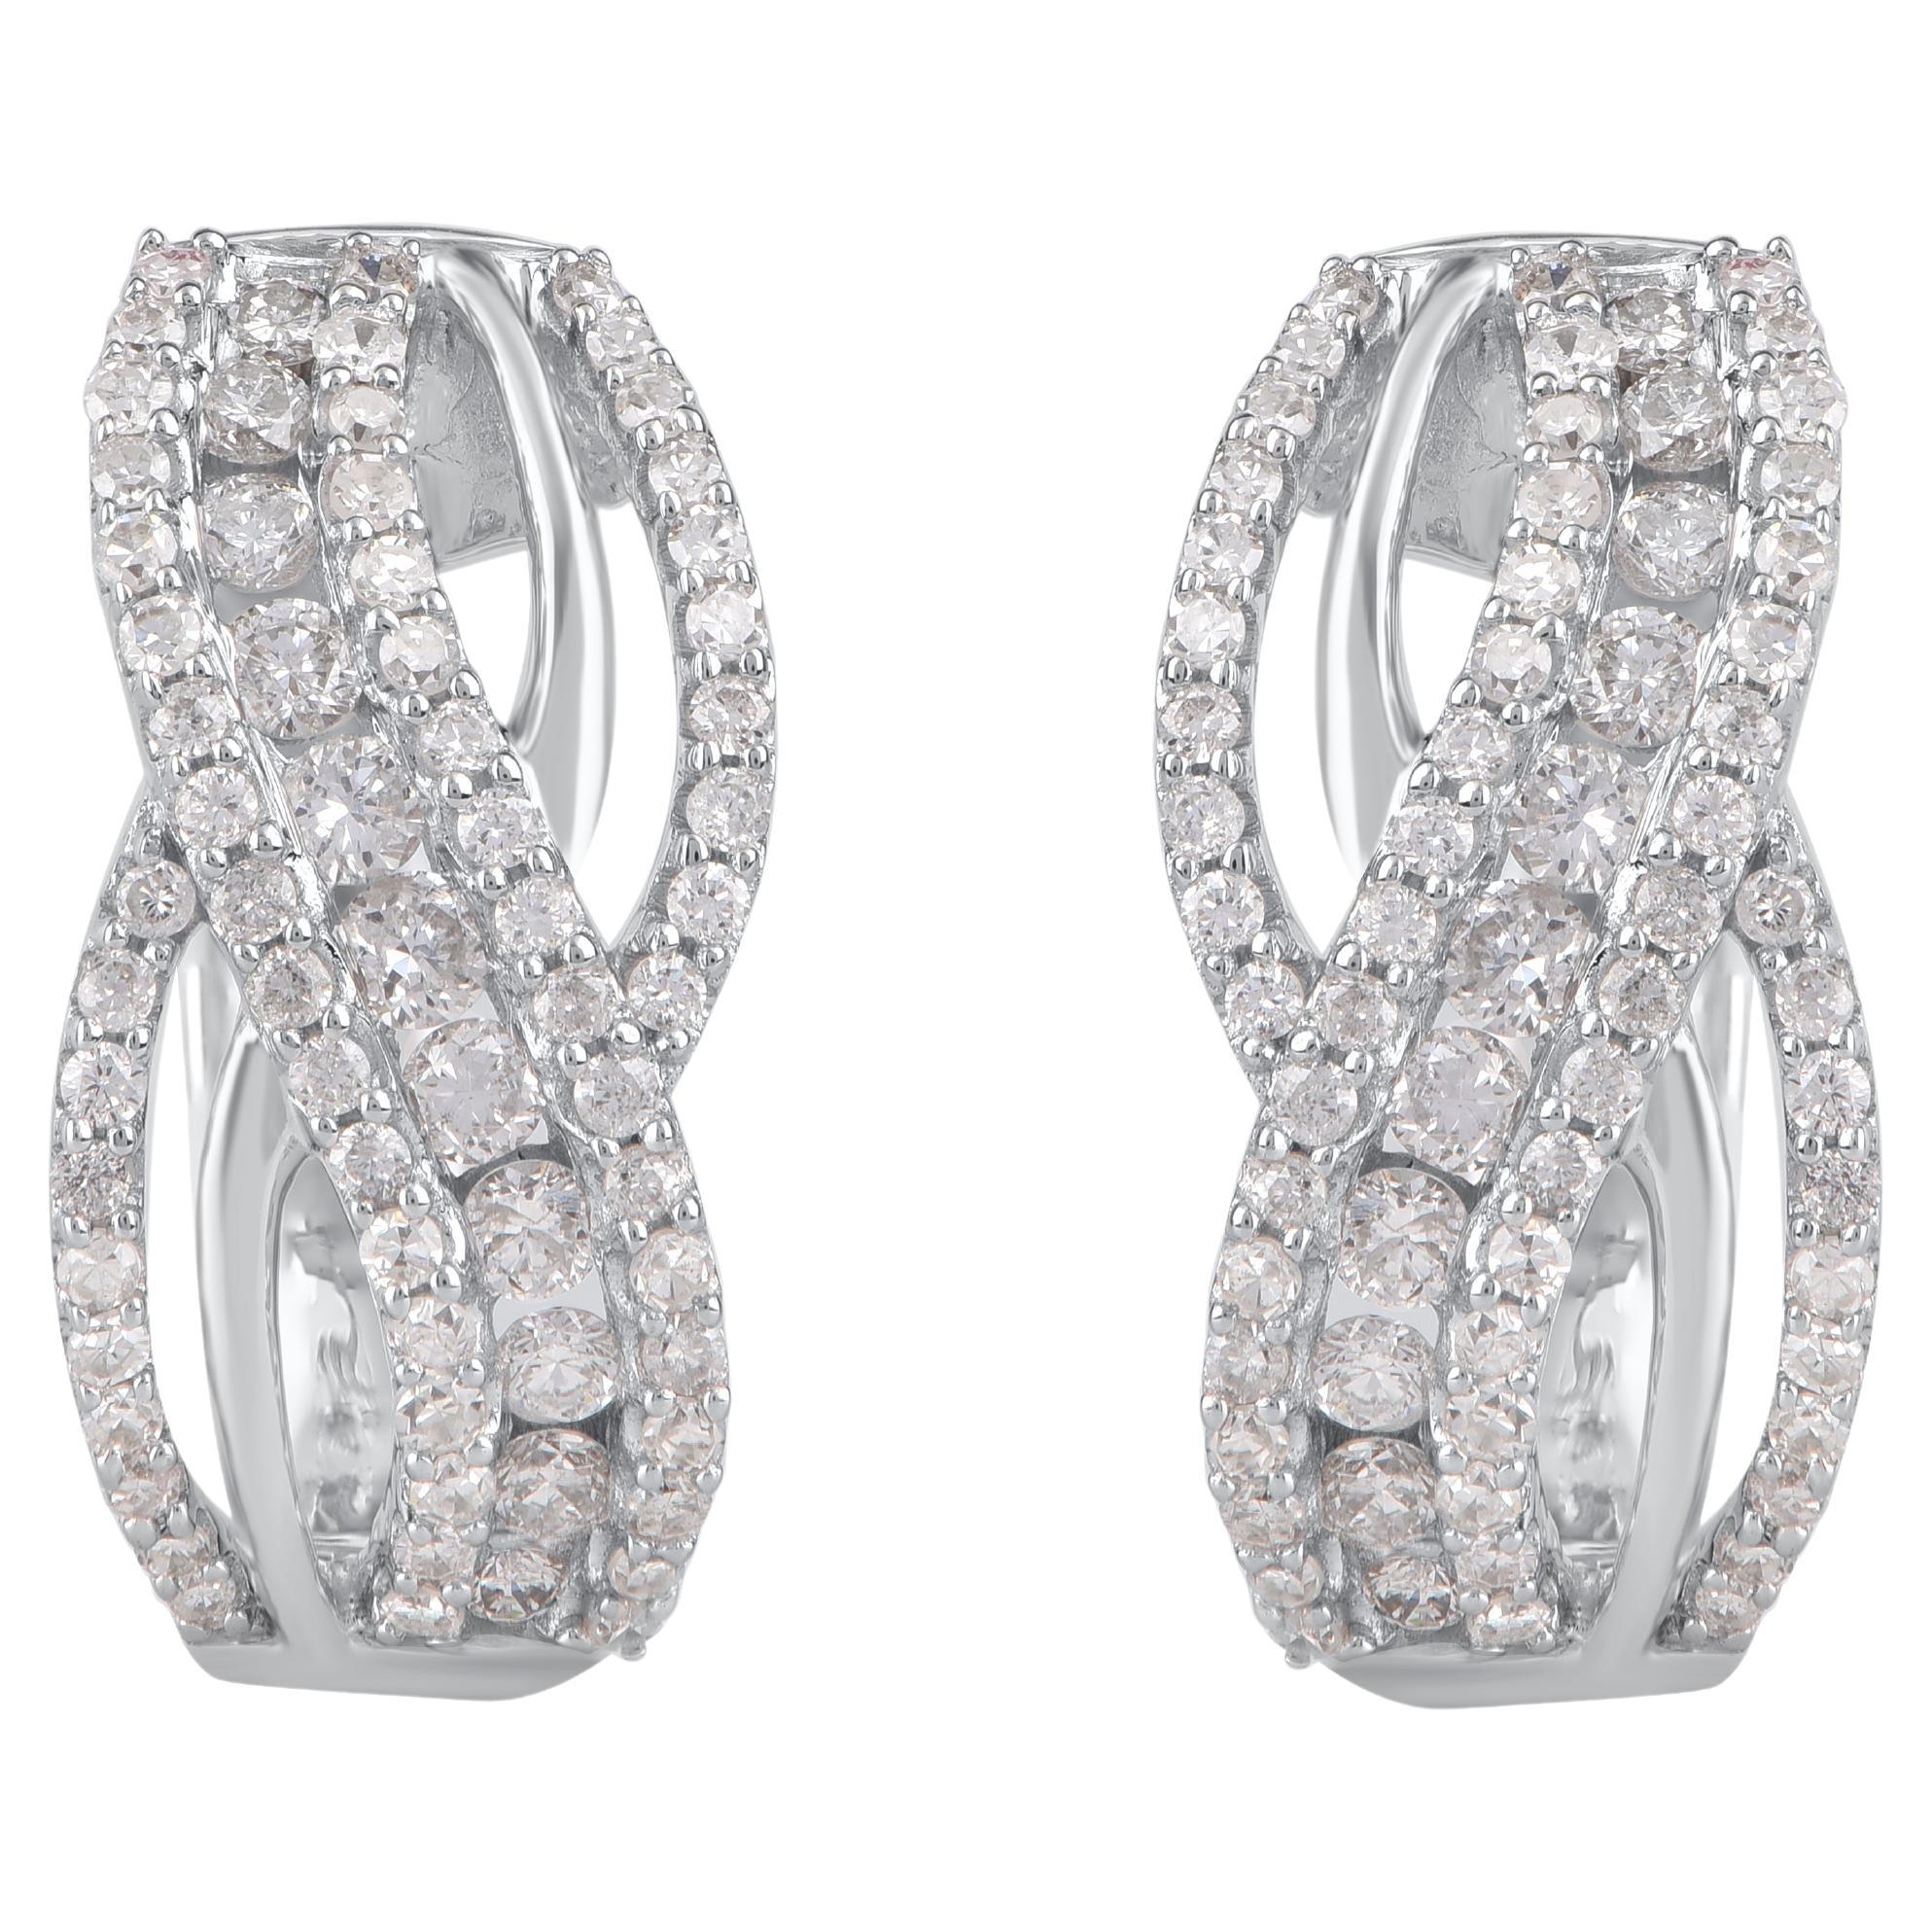 TJD 0.75 Carat Natural Round Cut Diamond 14KT White Gold Infinity Hoop Earrings